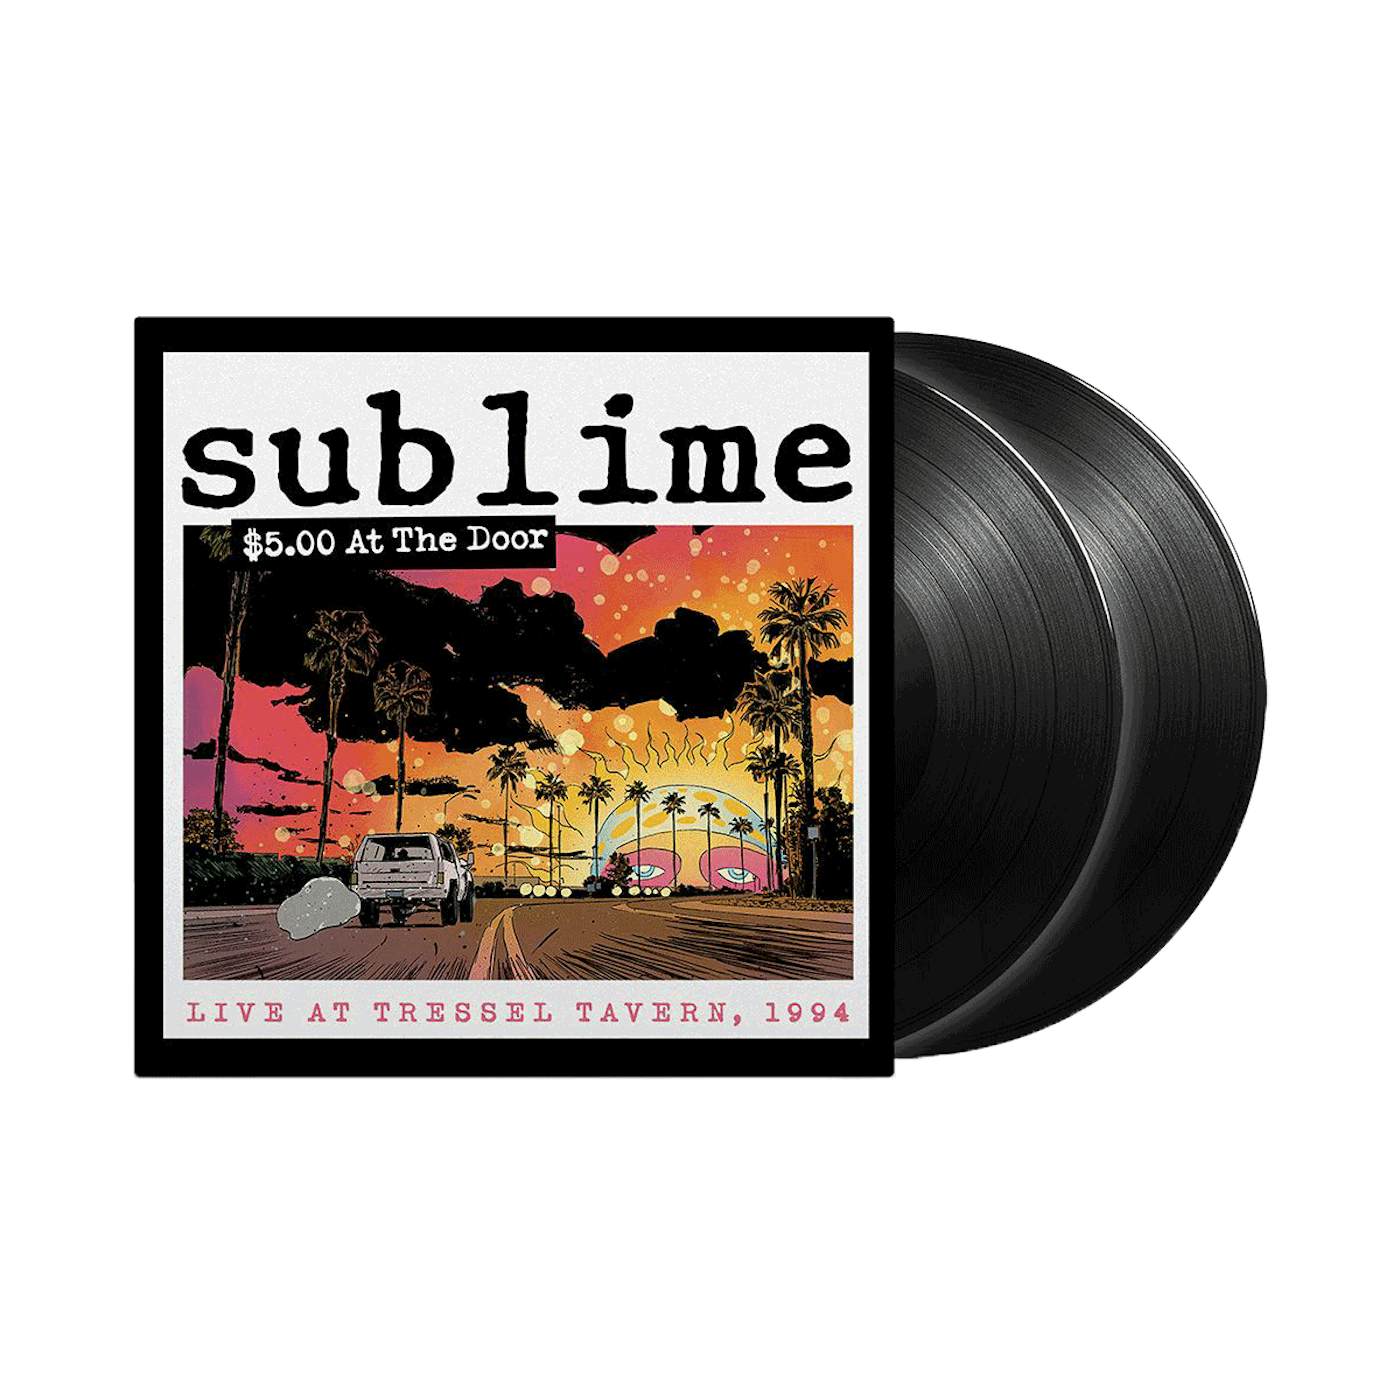 Sublime $5.00 At The Door (Live) 2LP